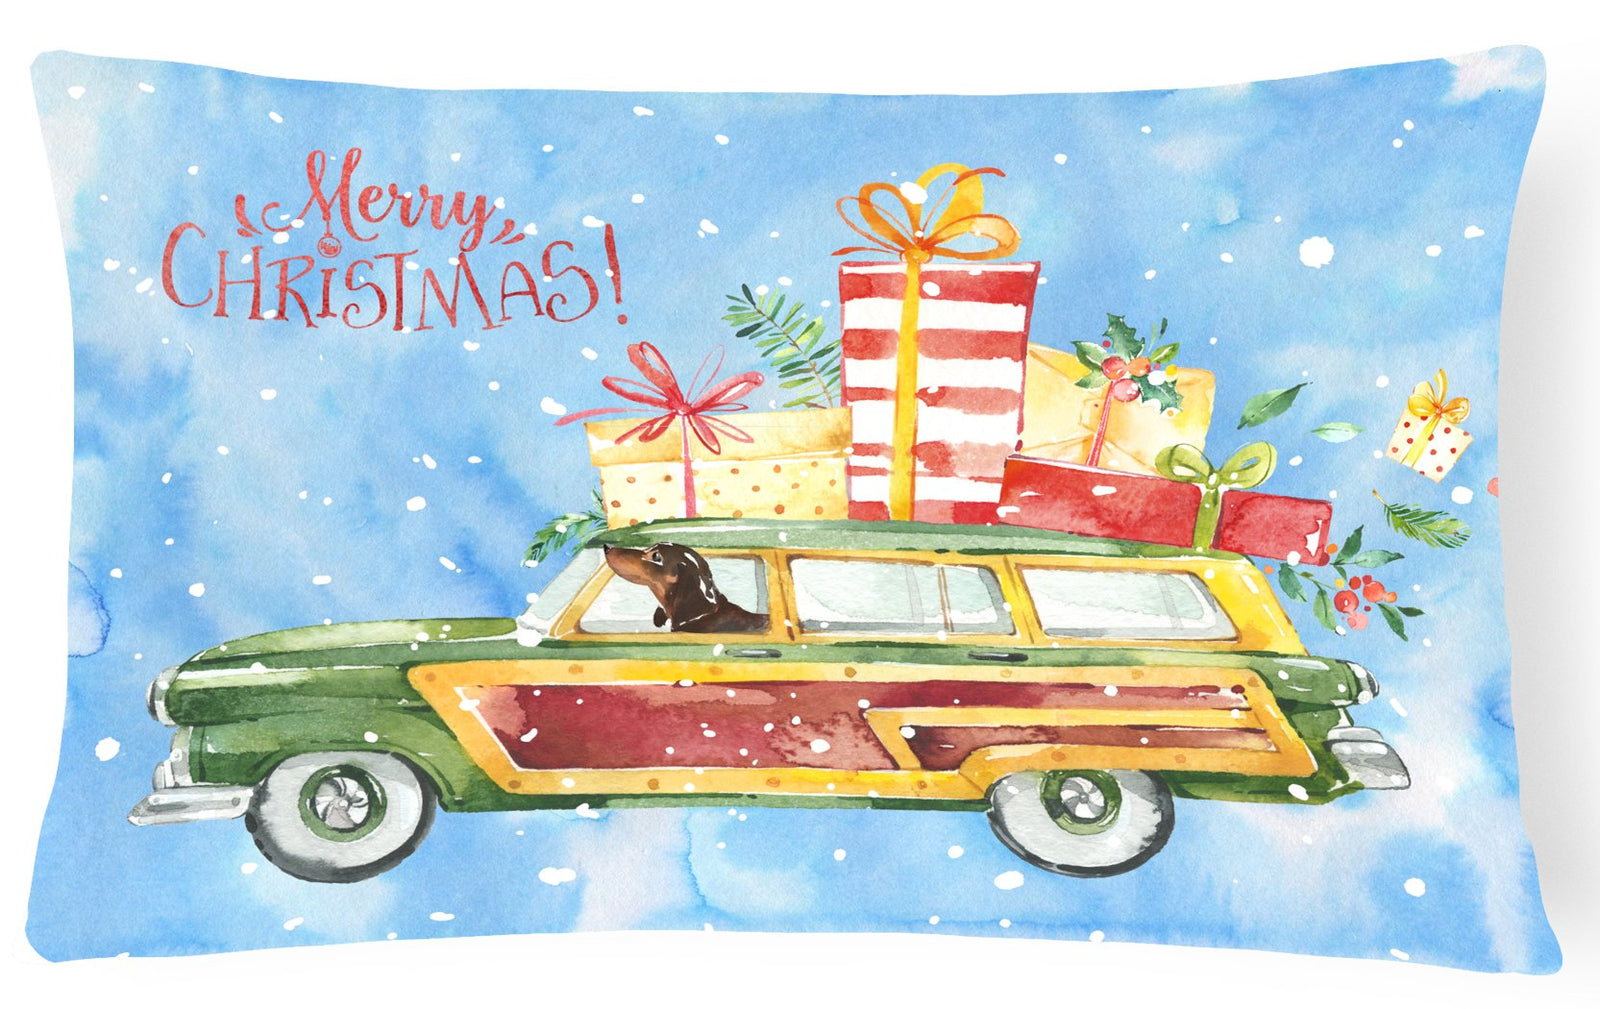 Merry Christmas Dachshund Canvas Fabric Decorative Pillow CK2443PW1216 by Caroline's Treasures